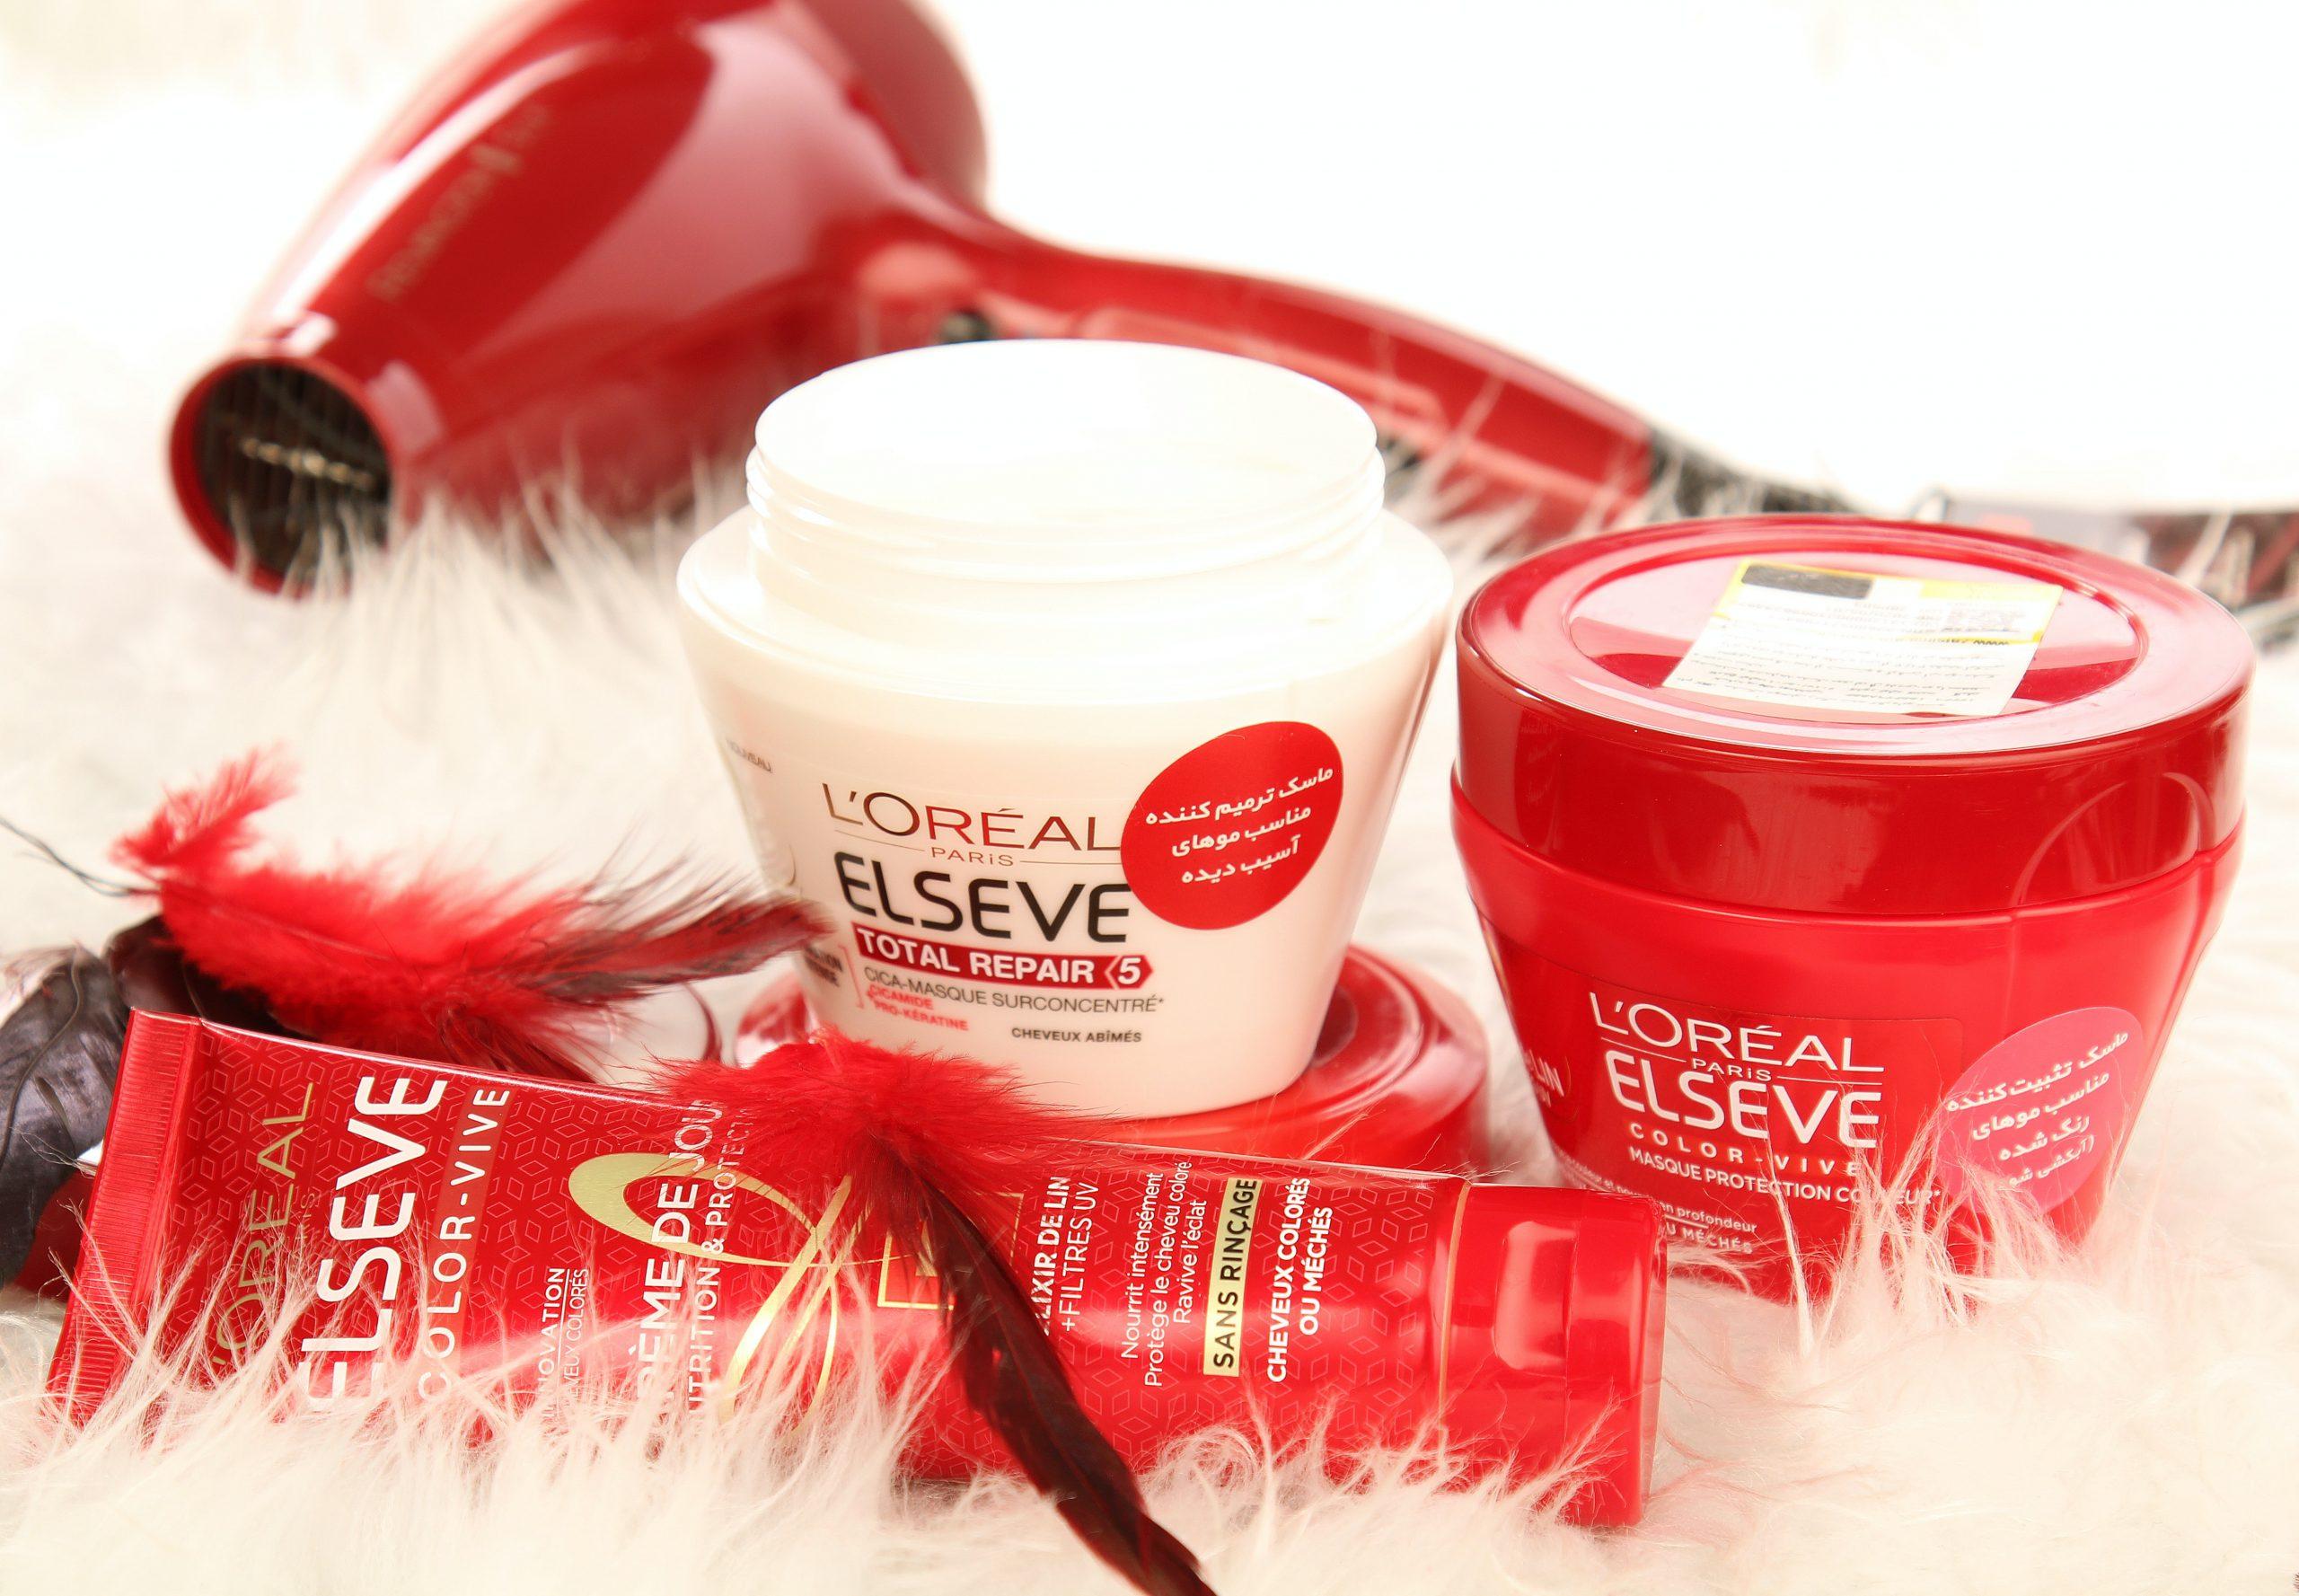 L'Oreal makeup products